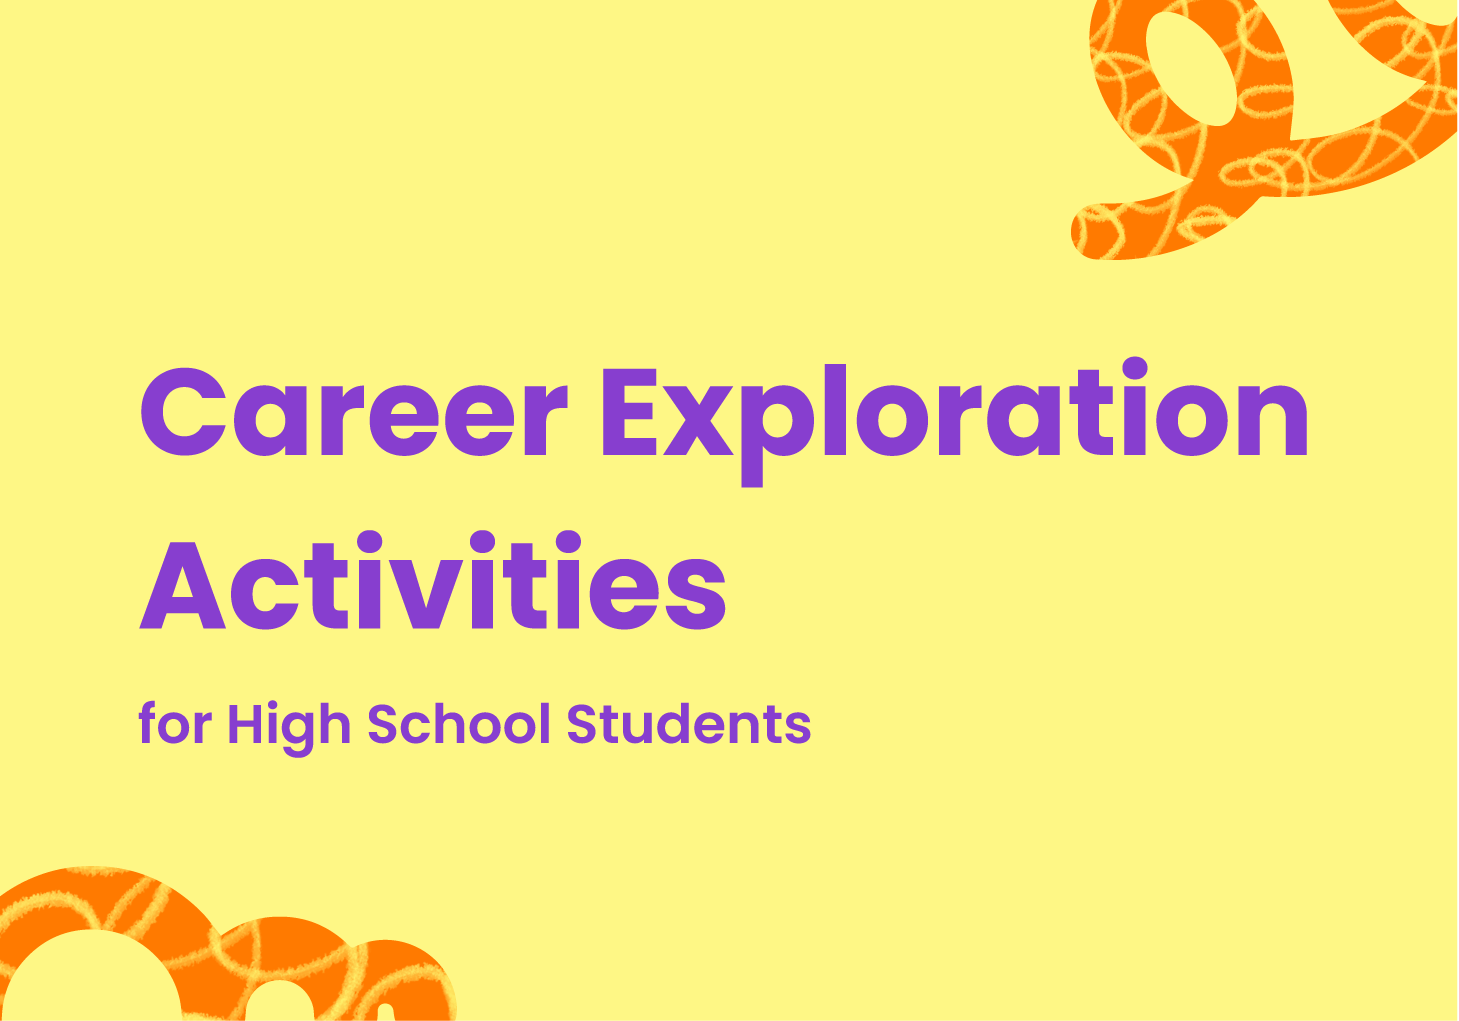 Career Exploration Activities for High School Students